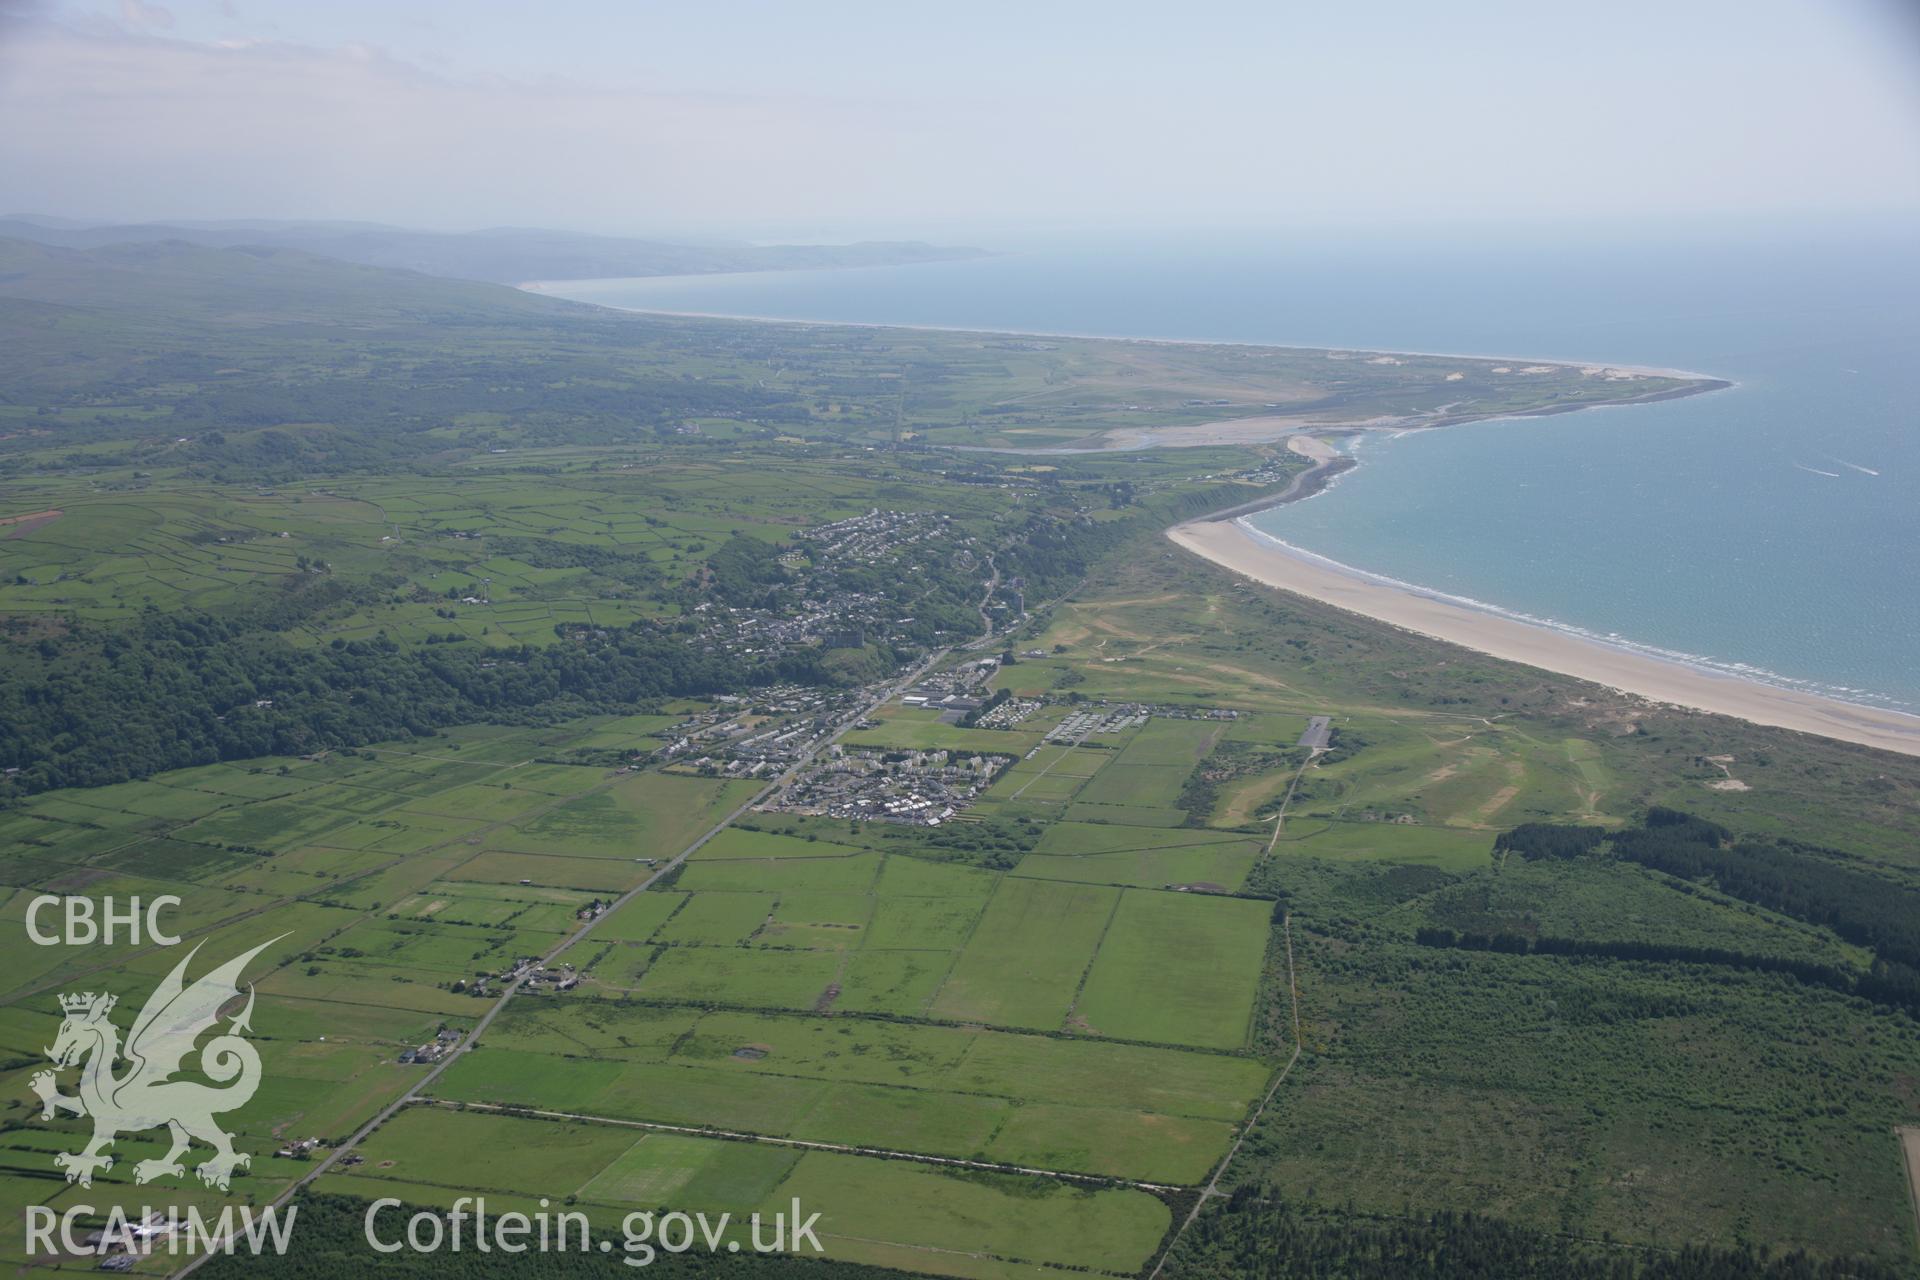 RCAHMW colour oblique aerial photograph of Harlech. A distant view, including the town, from the north. Taken on 14 June 2006 by Toby Driver.